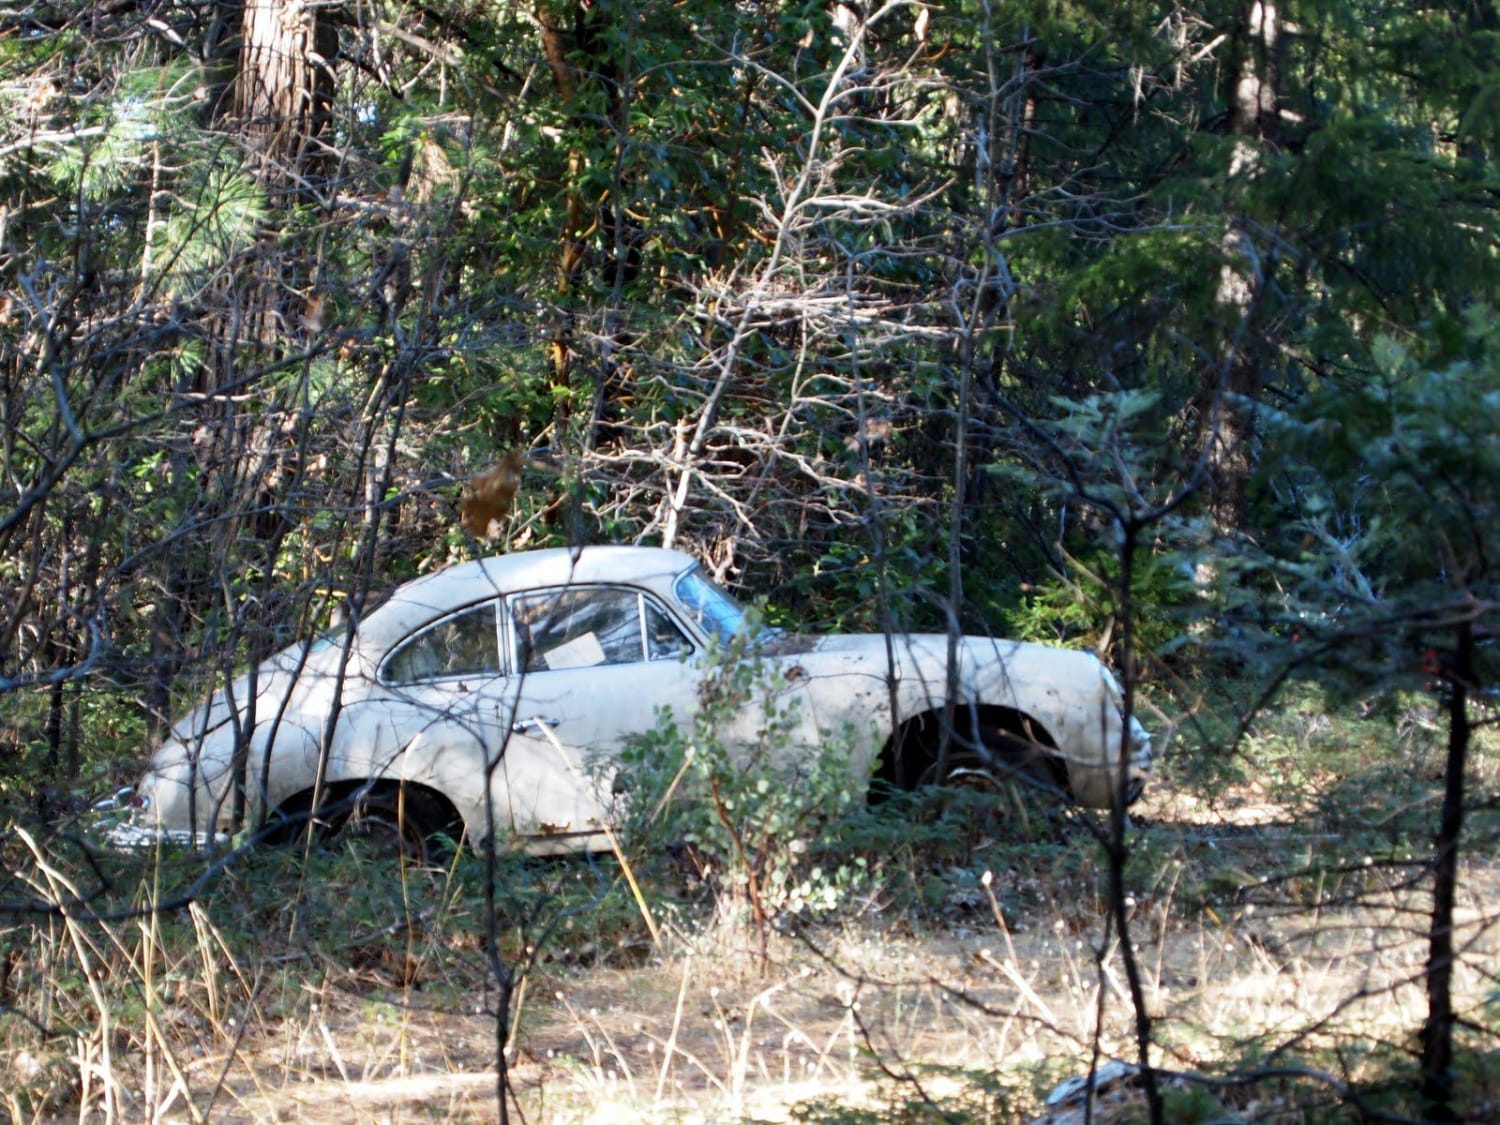 Porsche 356 outside of Nevada City, CA. Note on the window is someone trying to buy it years prior